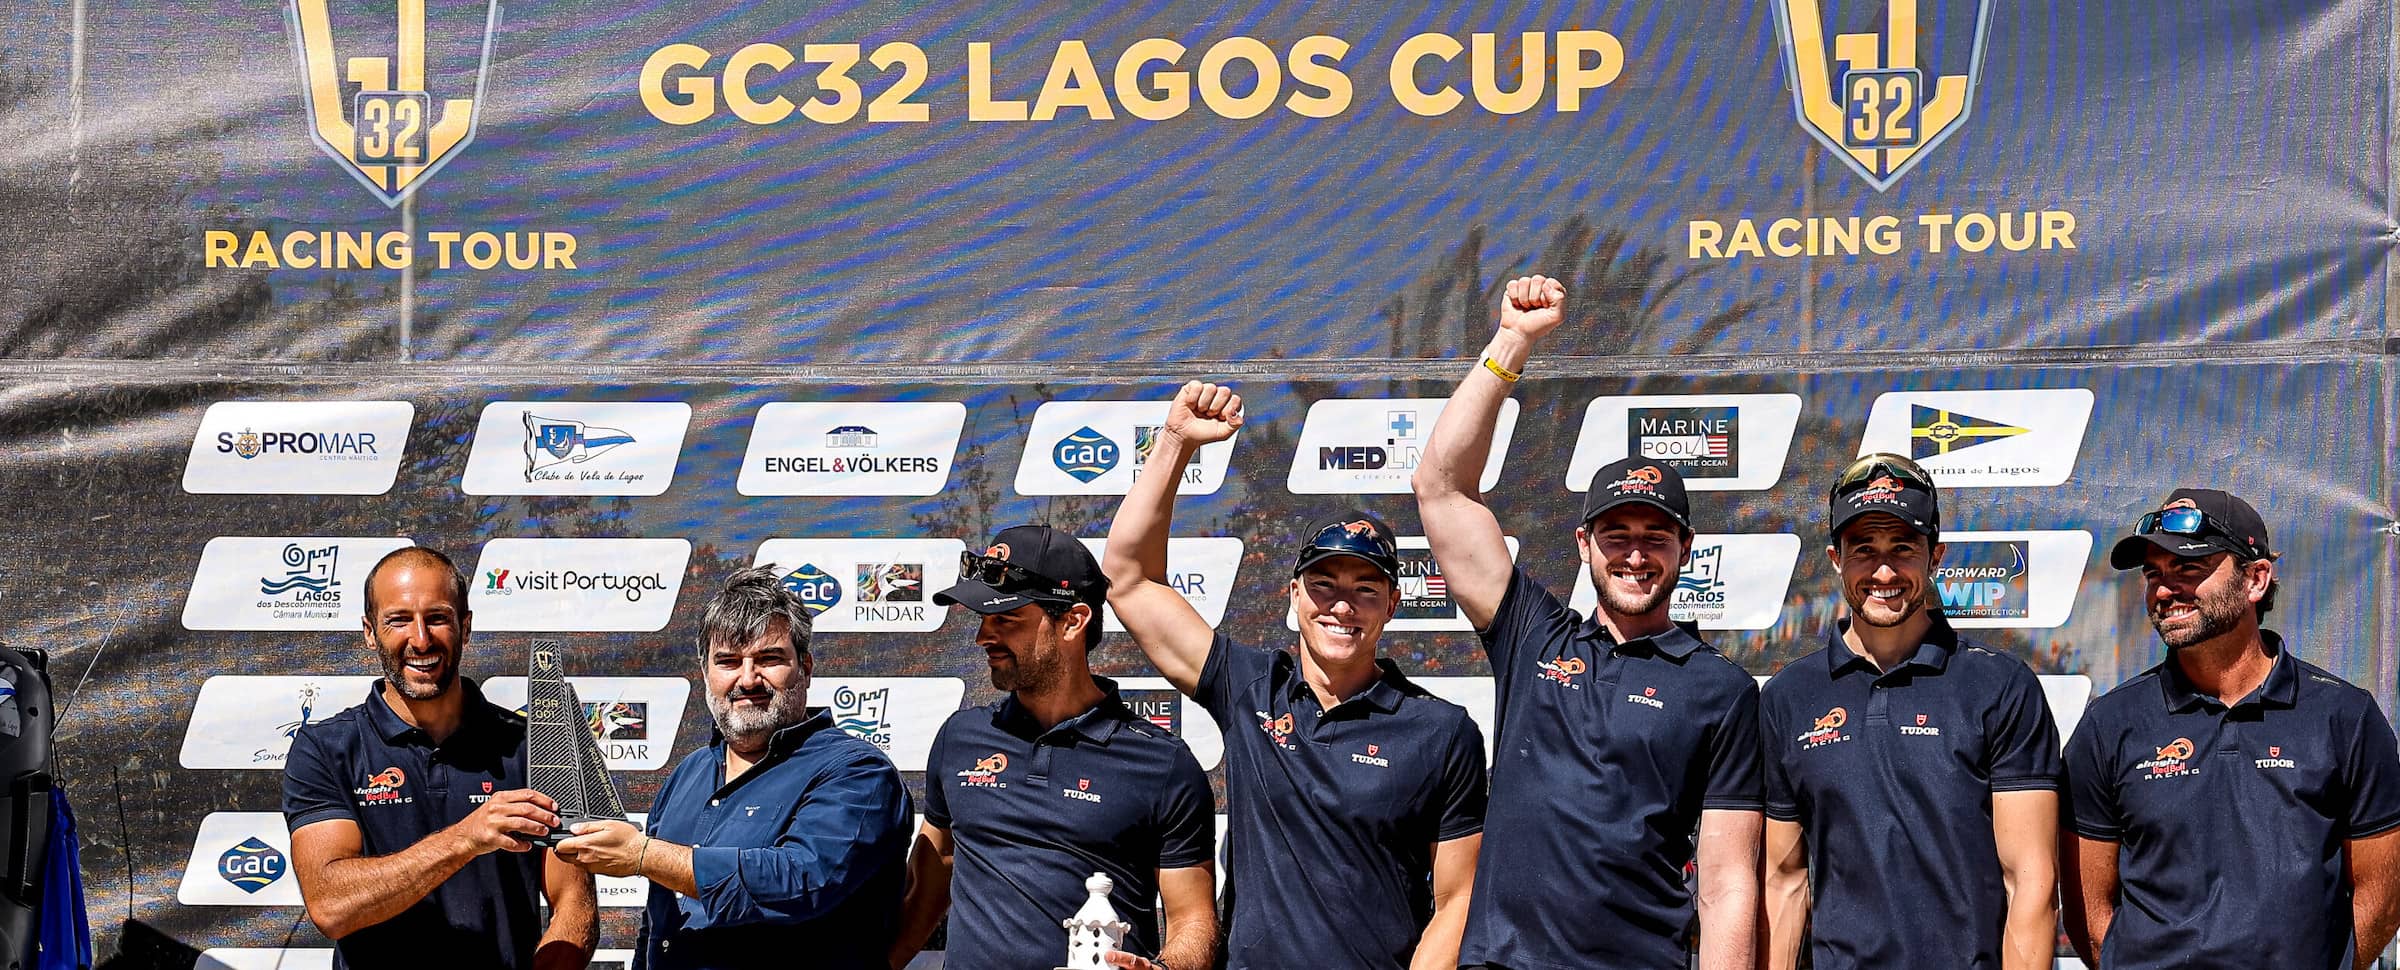 Alinghi red bull racing secure a second gc32 victory